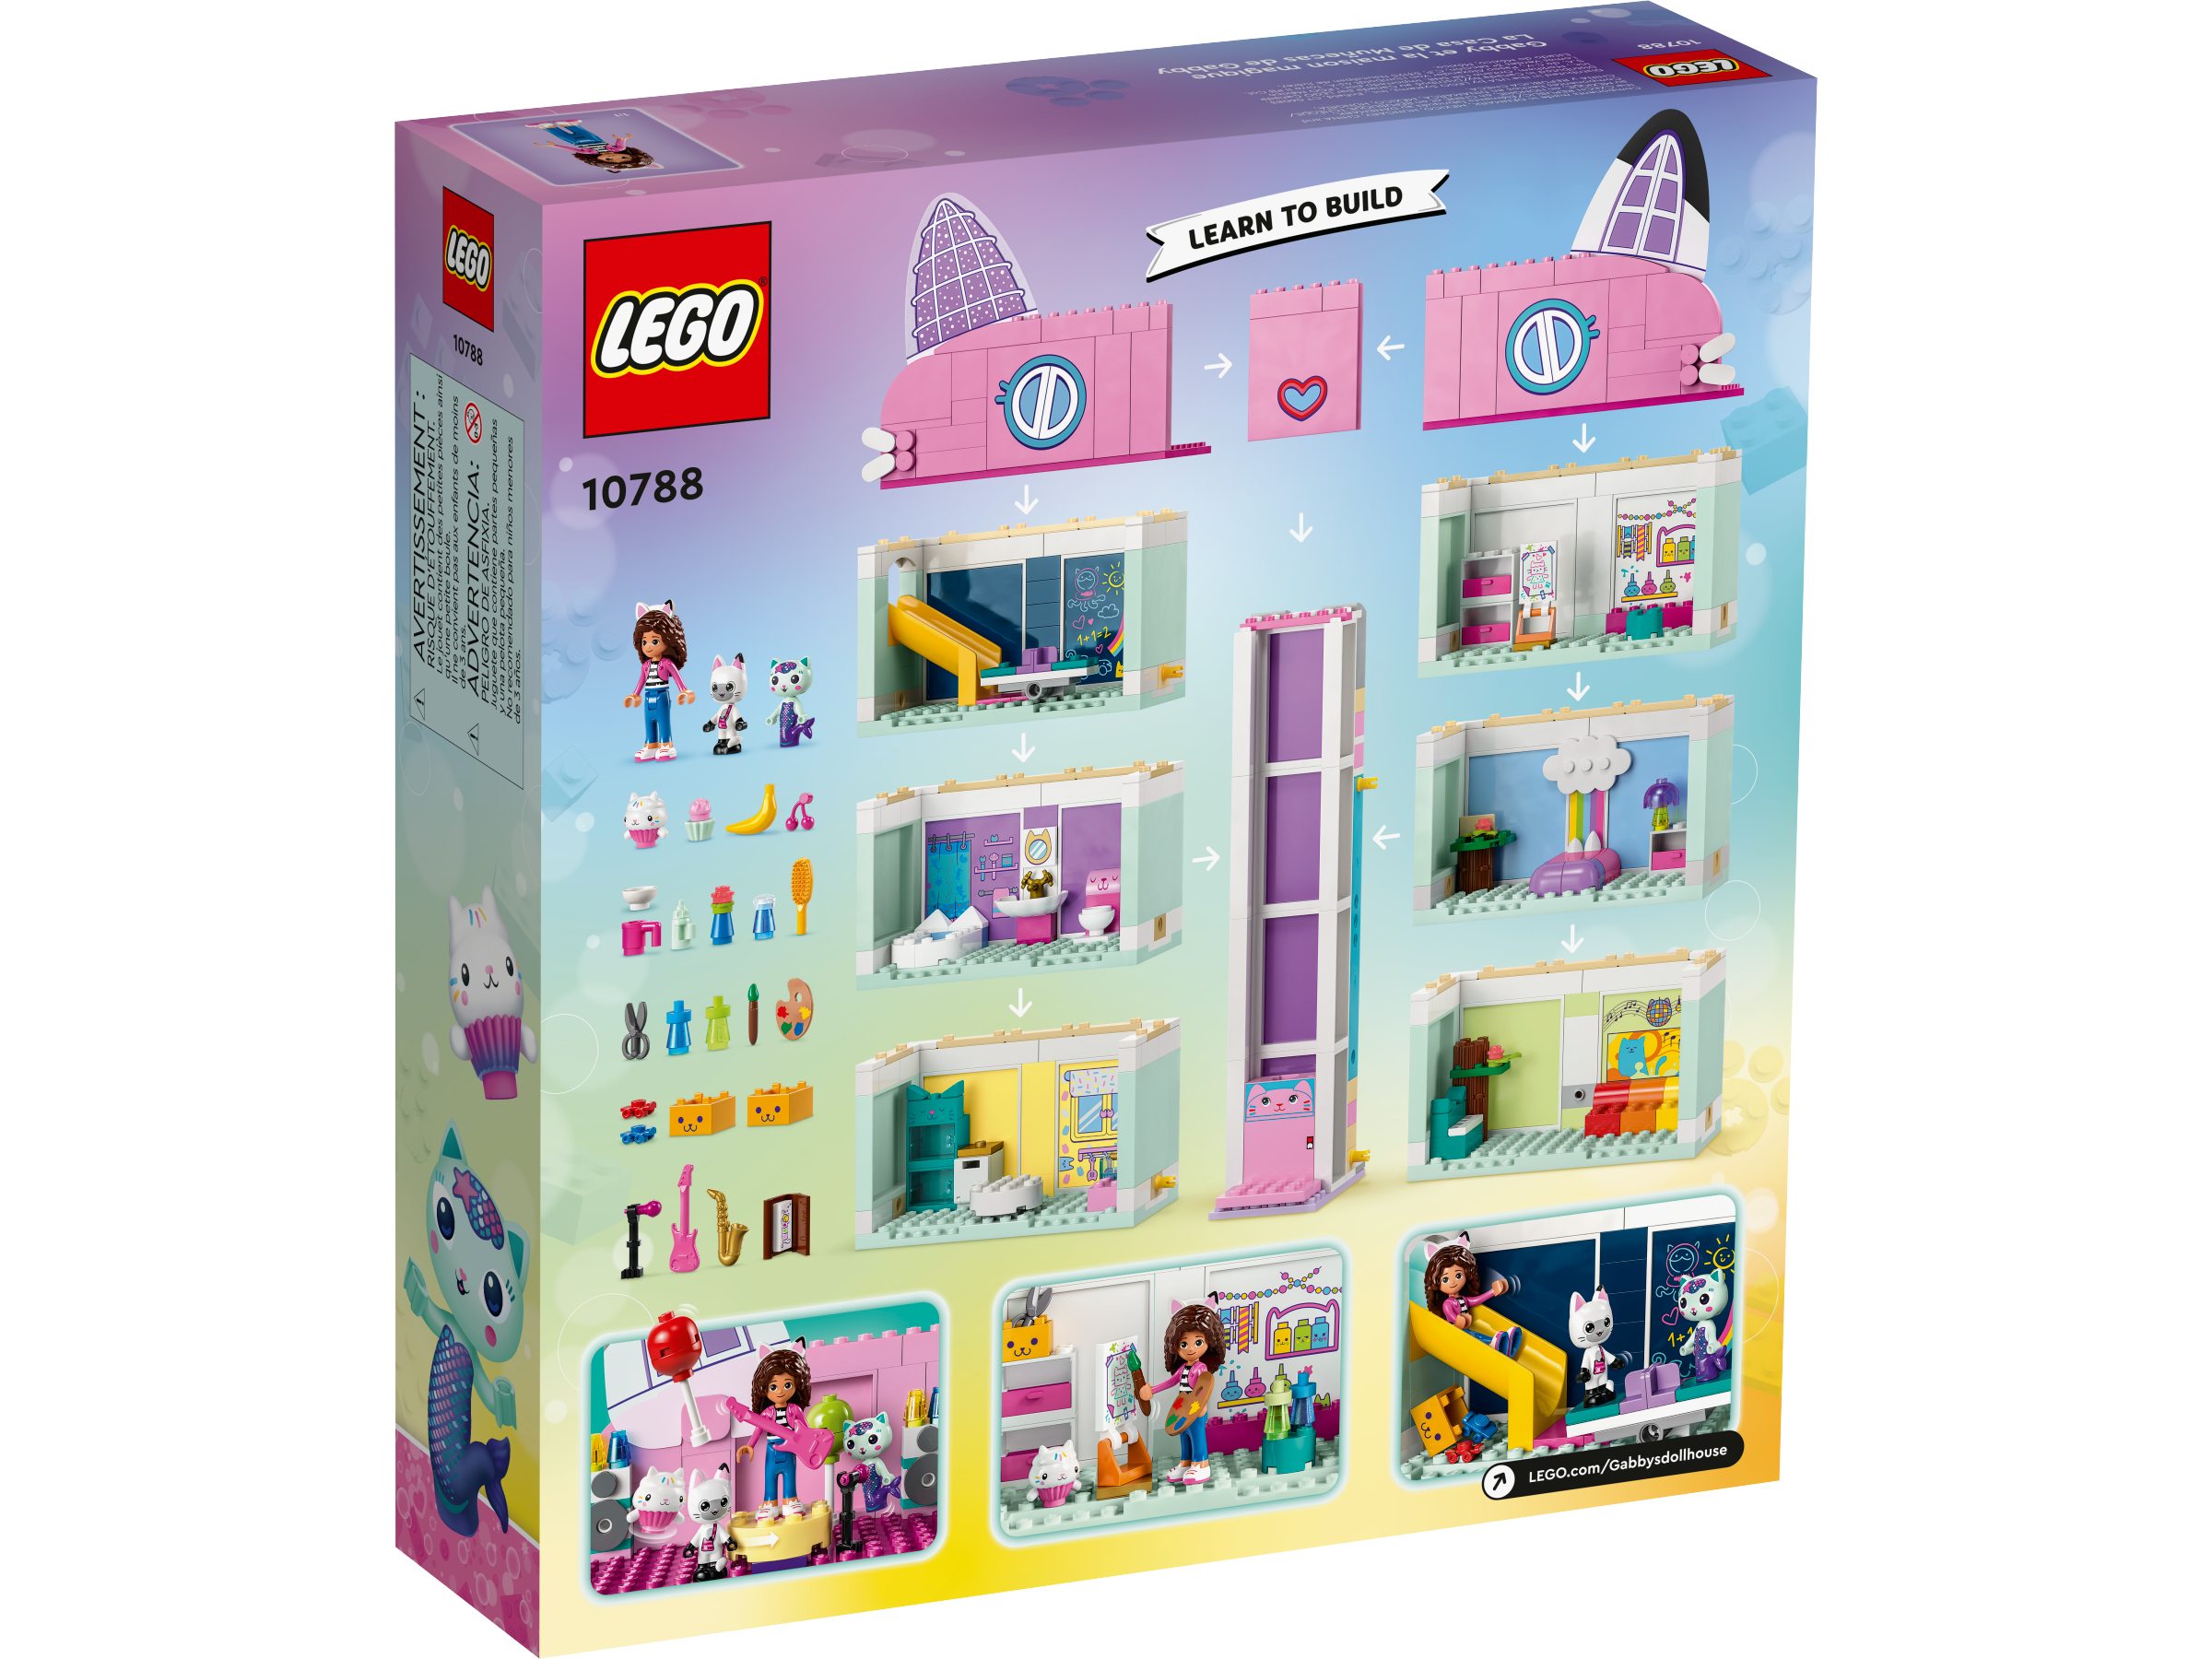 Shop Gabbys Dollhouse Lego with great discounts and prices online - Dec  2023